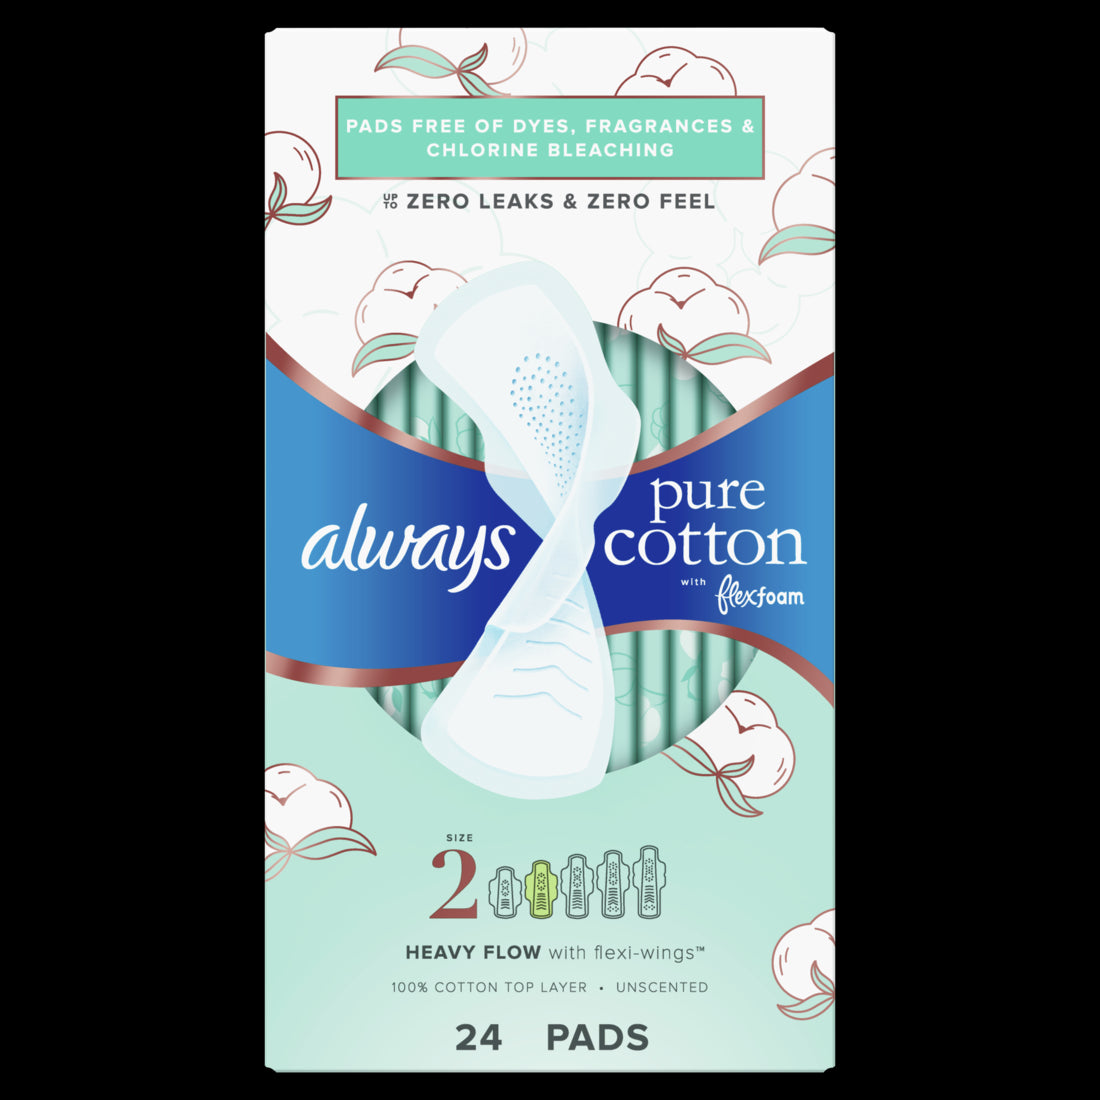 Always Pure Cotton with FlexFoam Size 1 Regular Flow Pads with